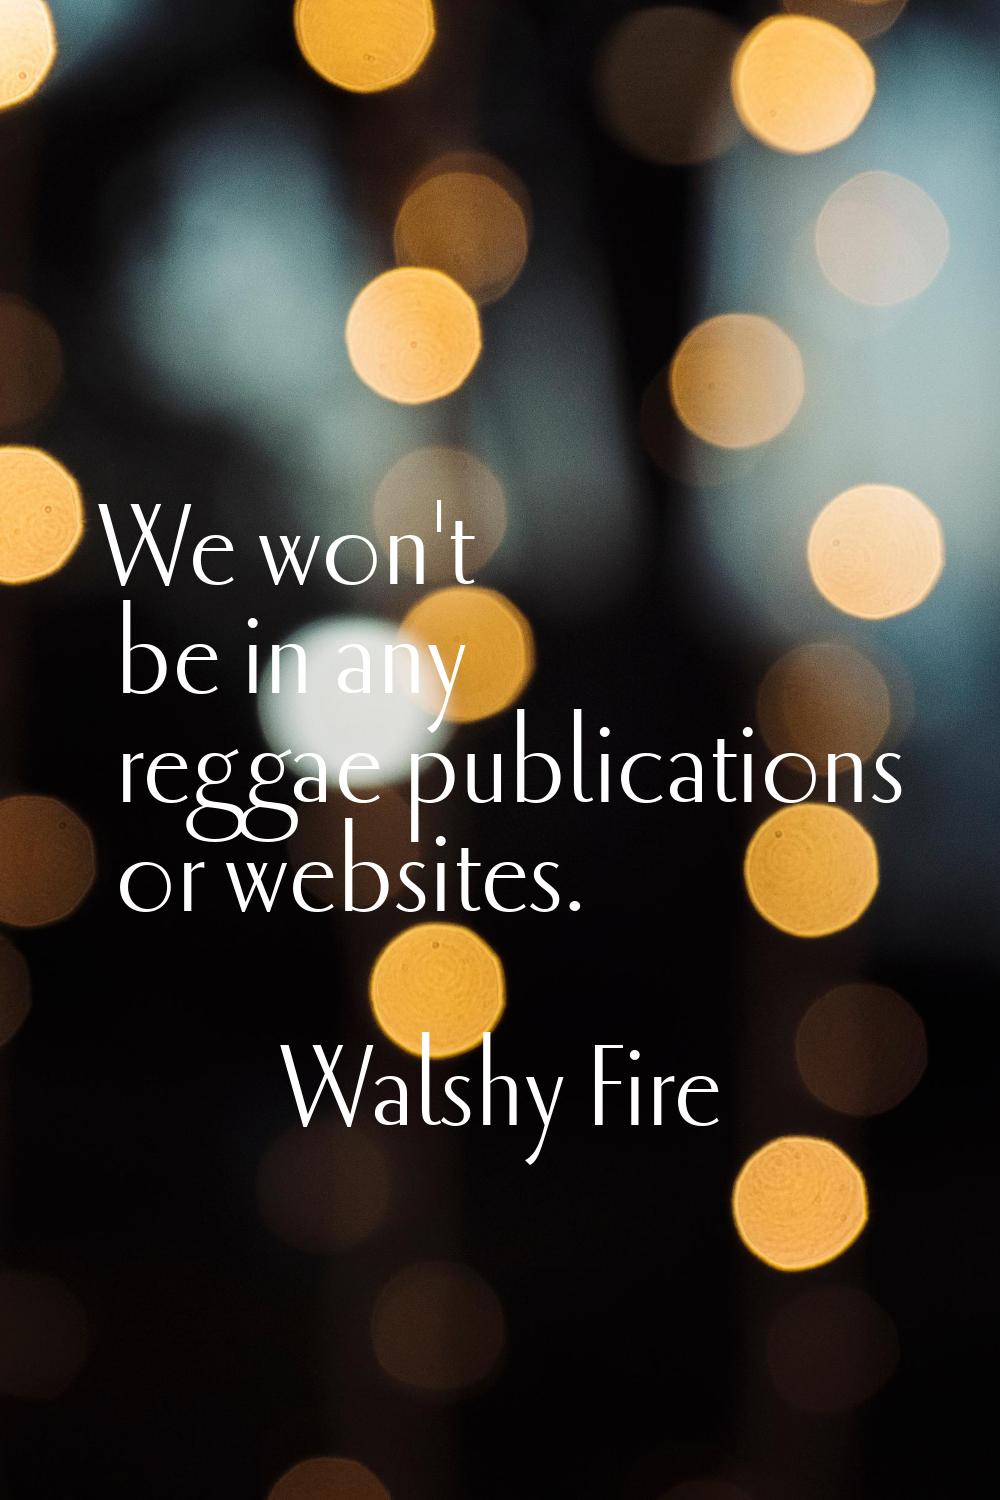 We won't be in any reggae publications or websites.